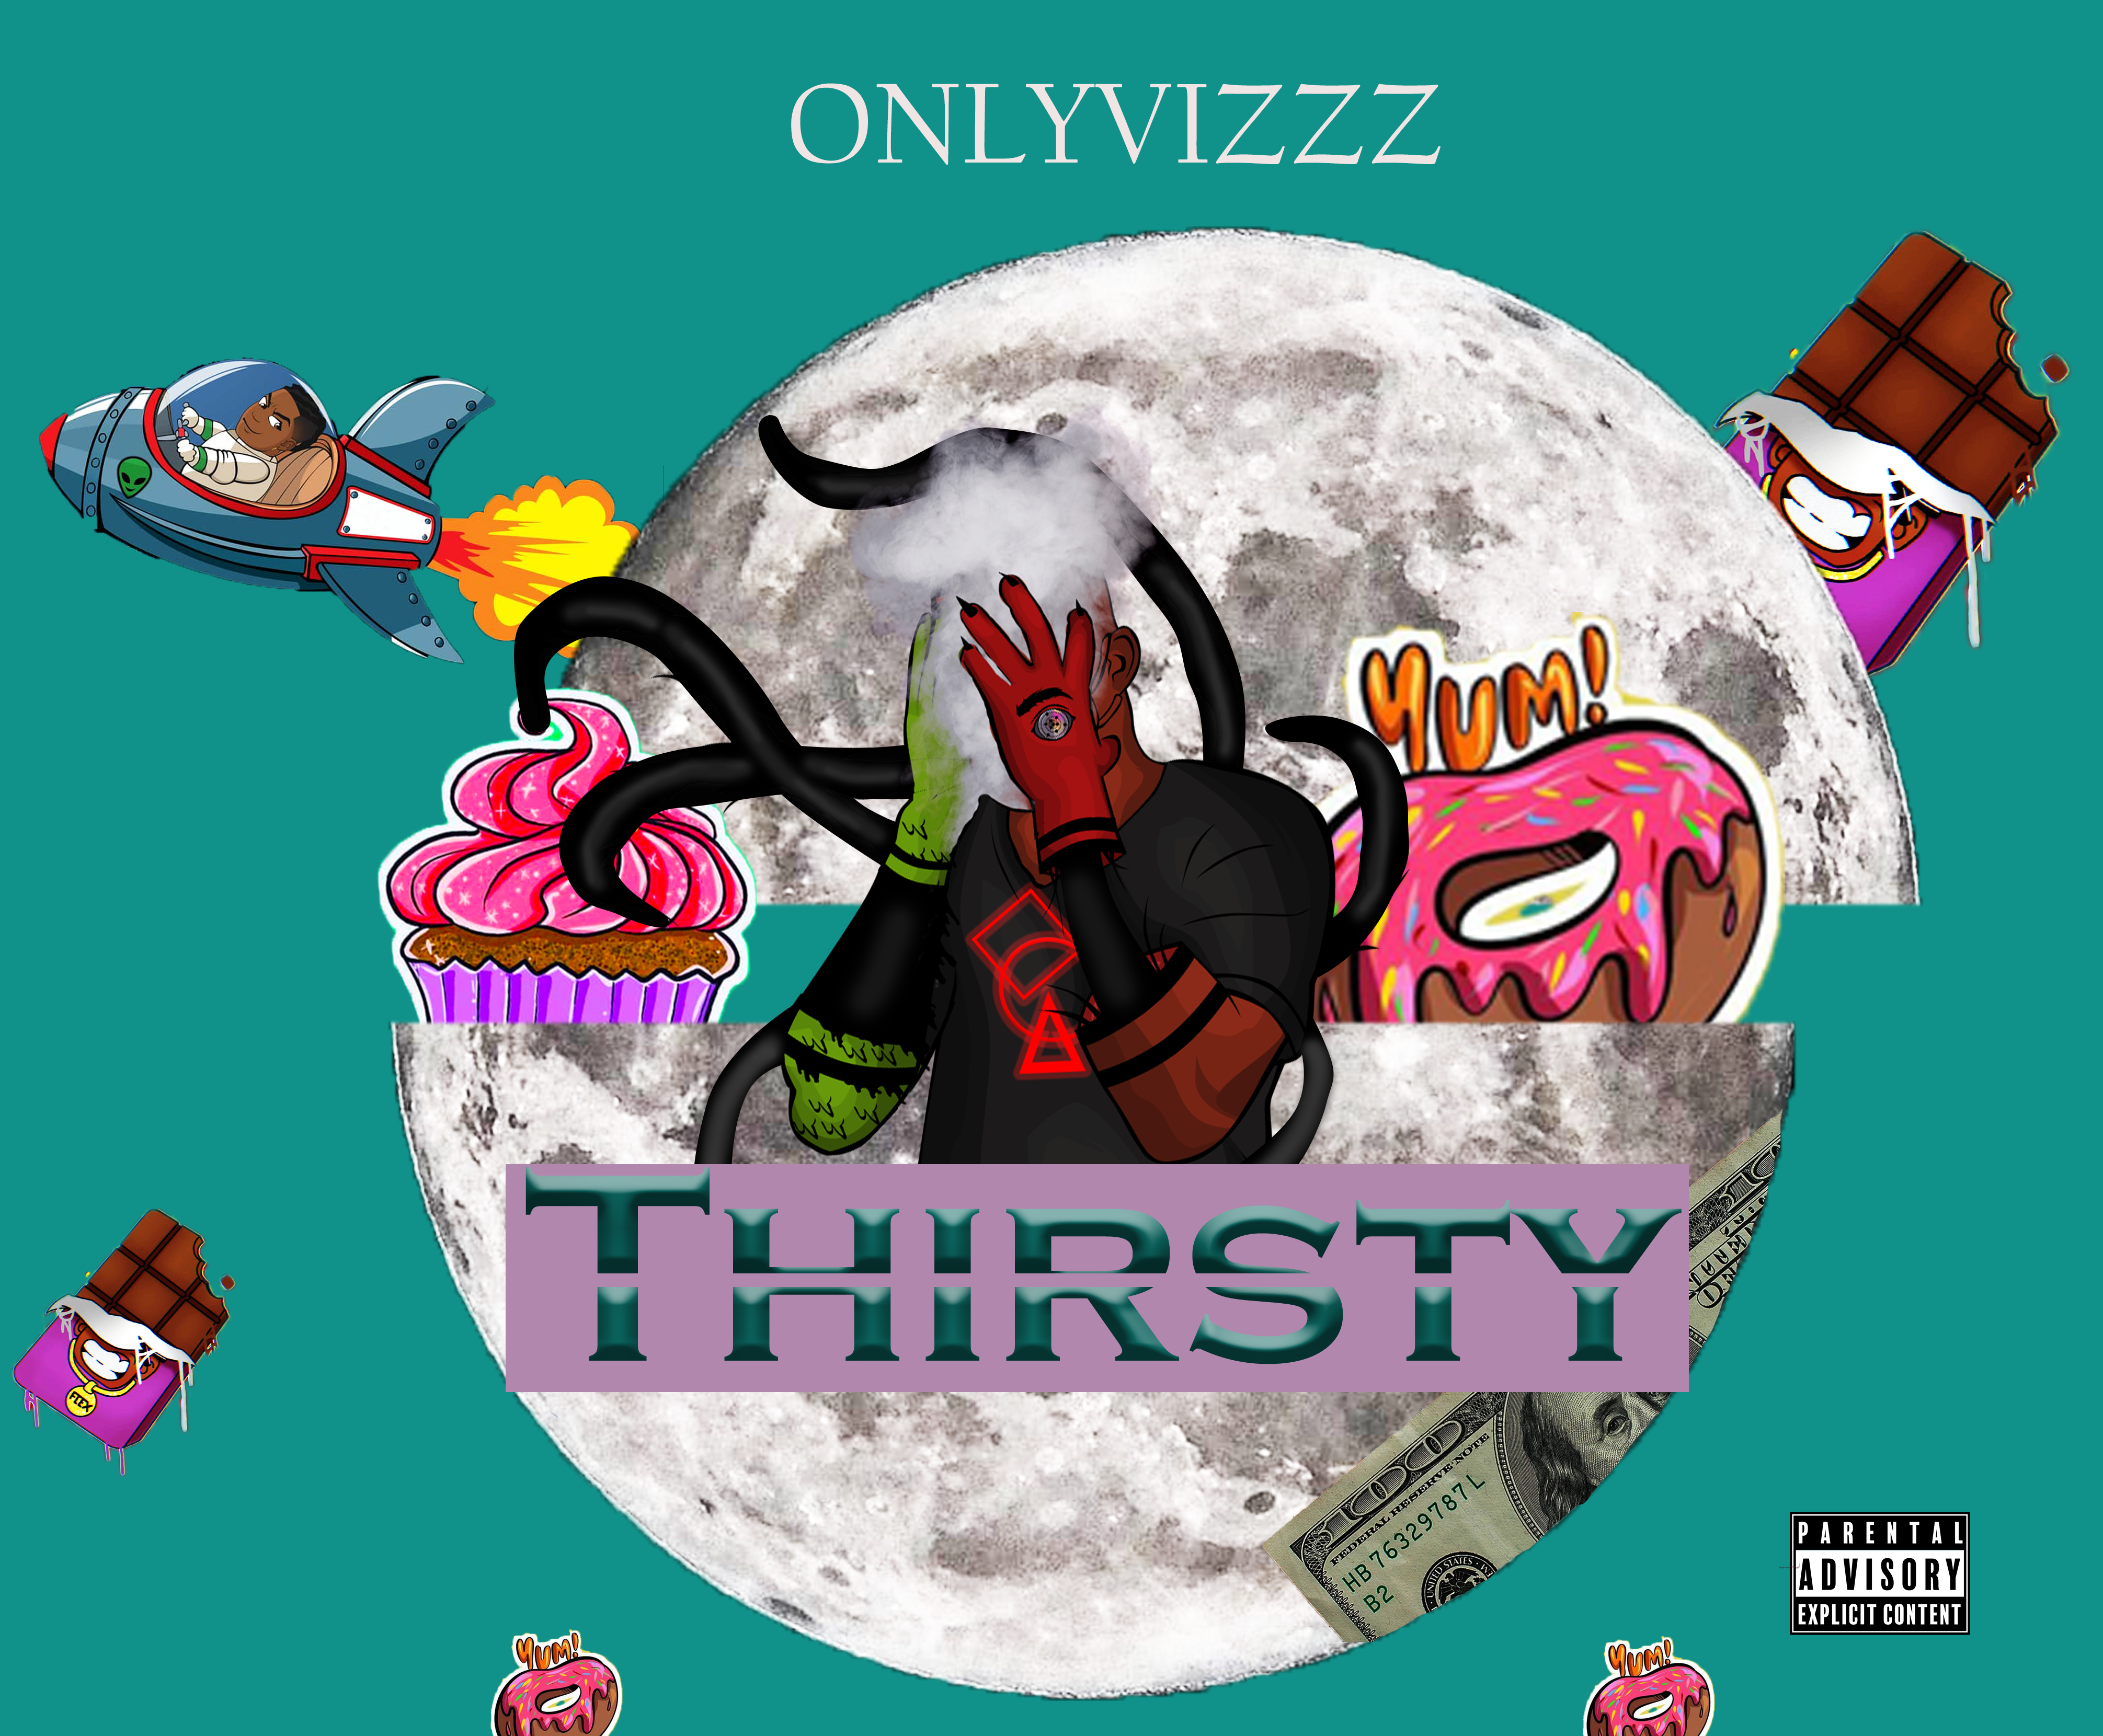 Thirsty EP by His Sound Ent. | Album